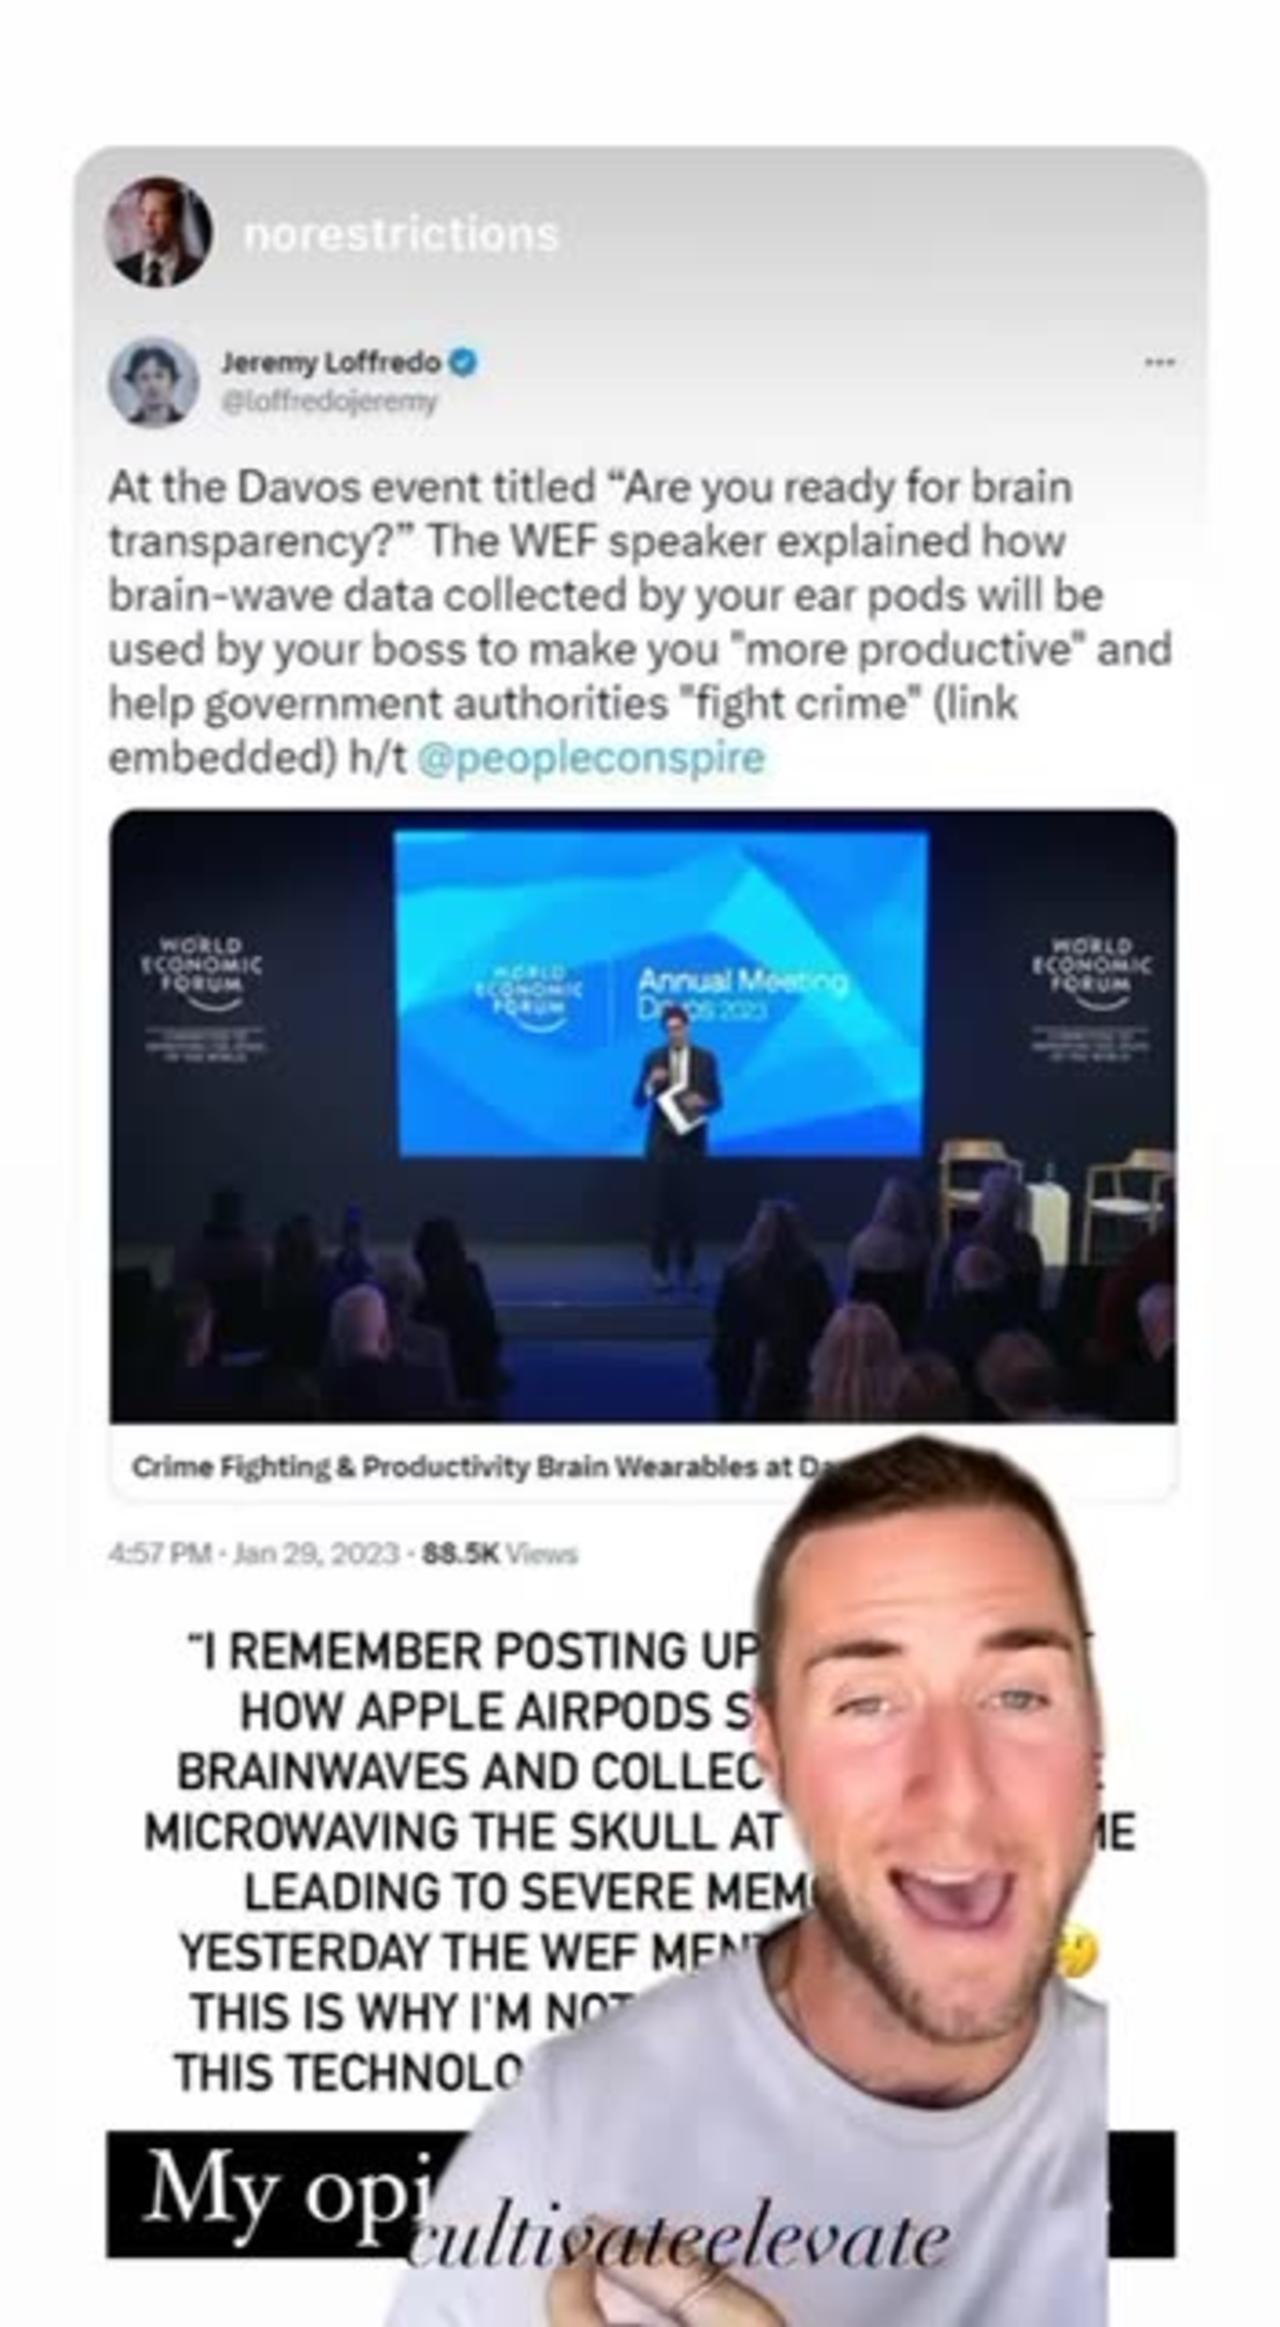 AirPods are gathering data about your brainwaves.